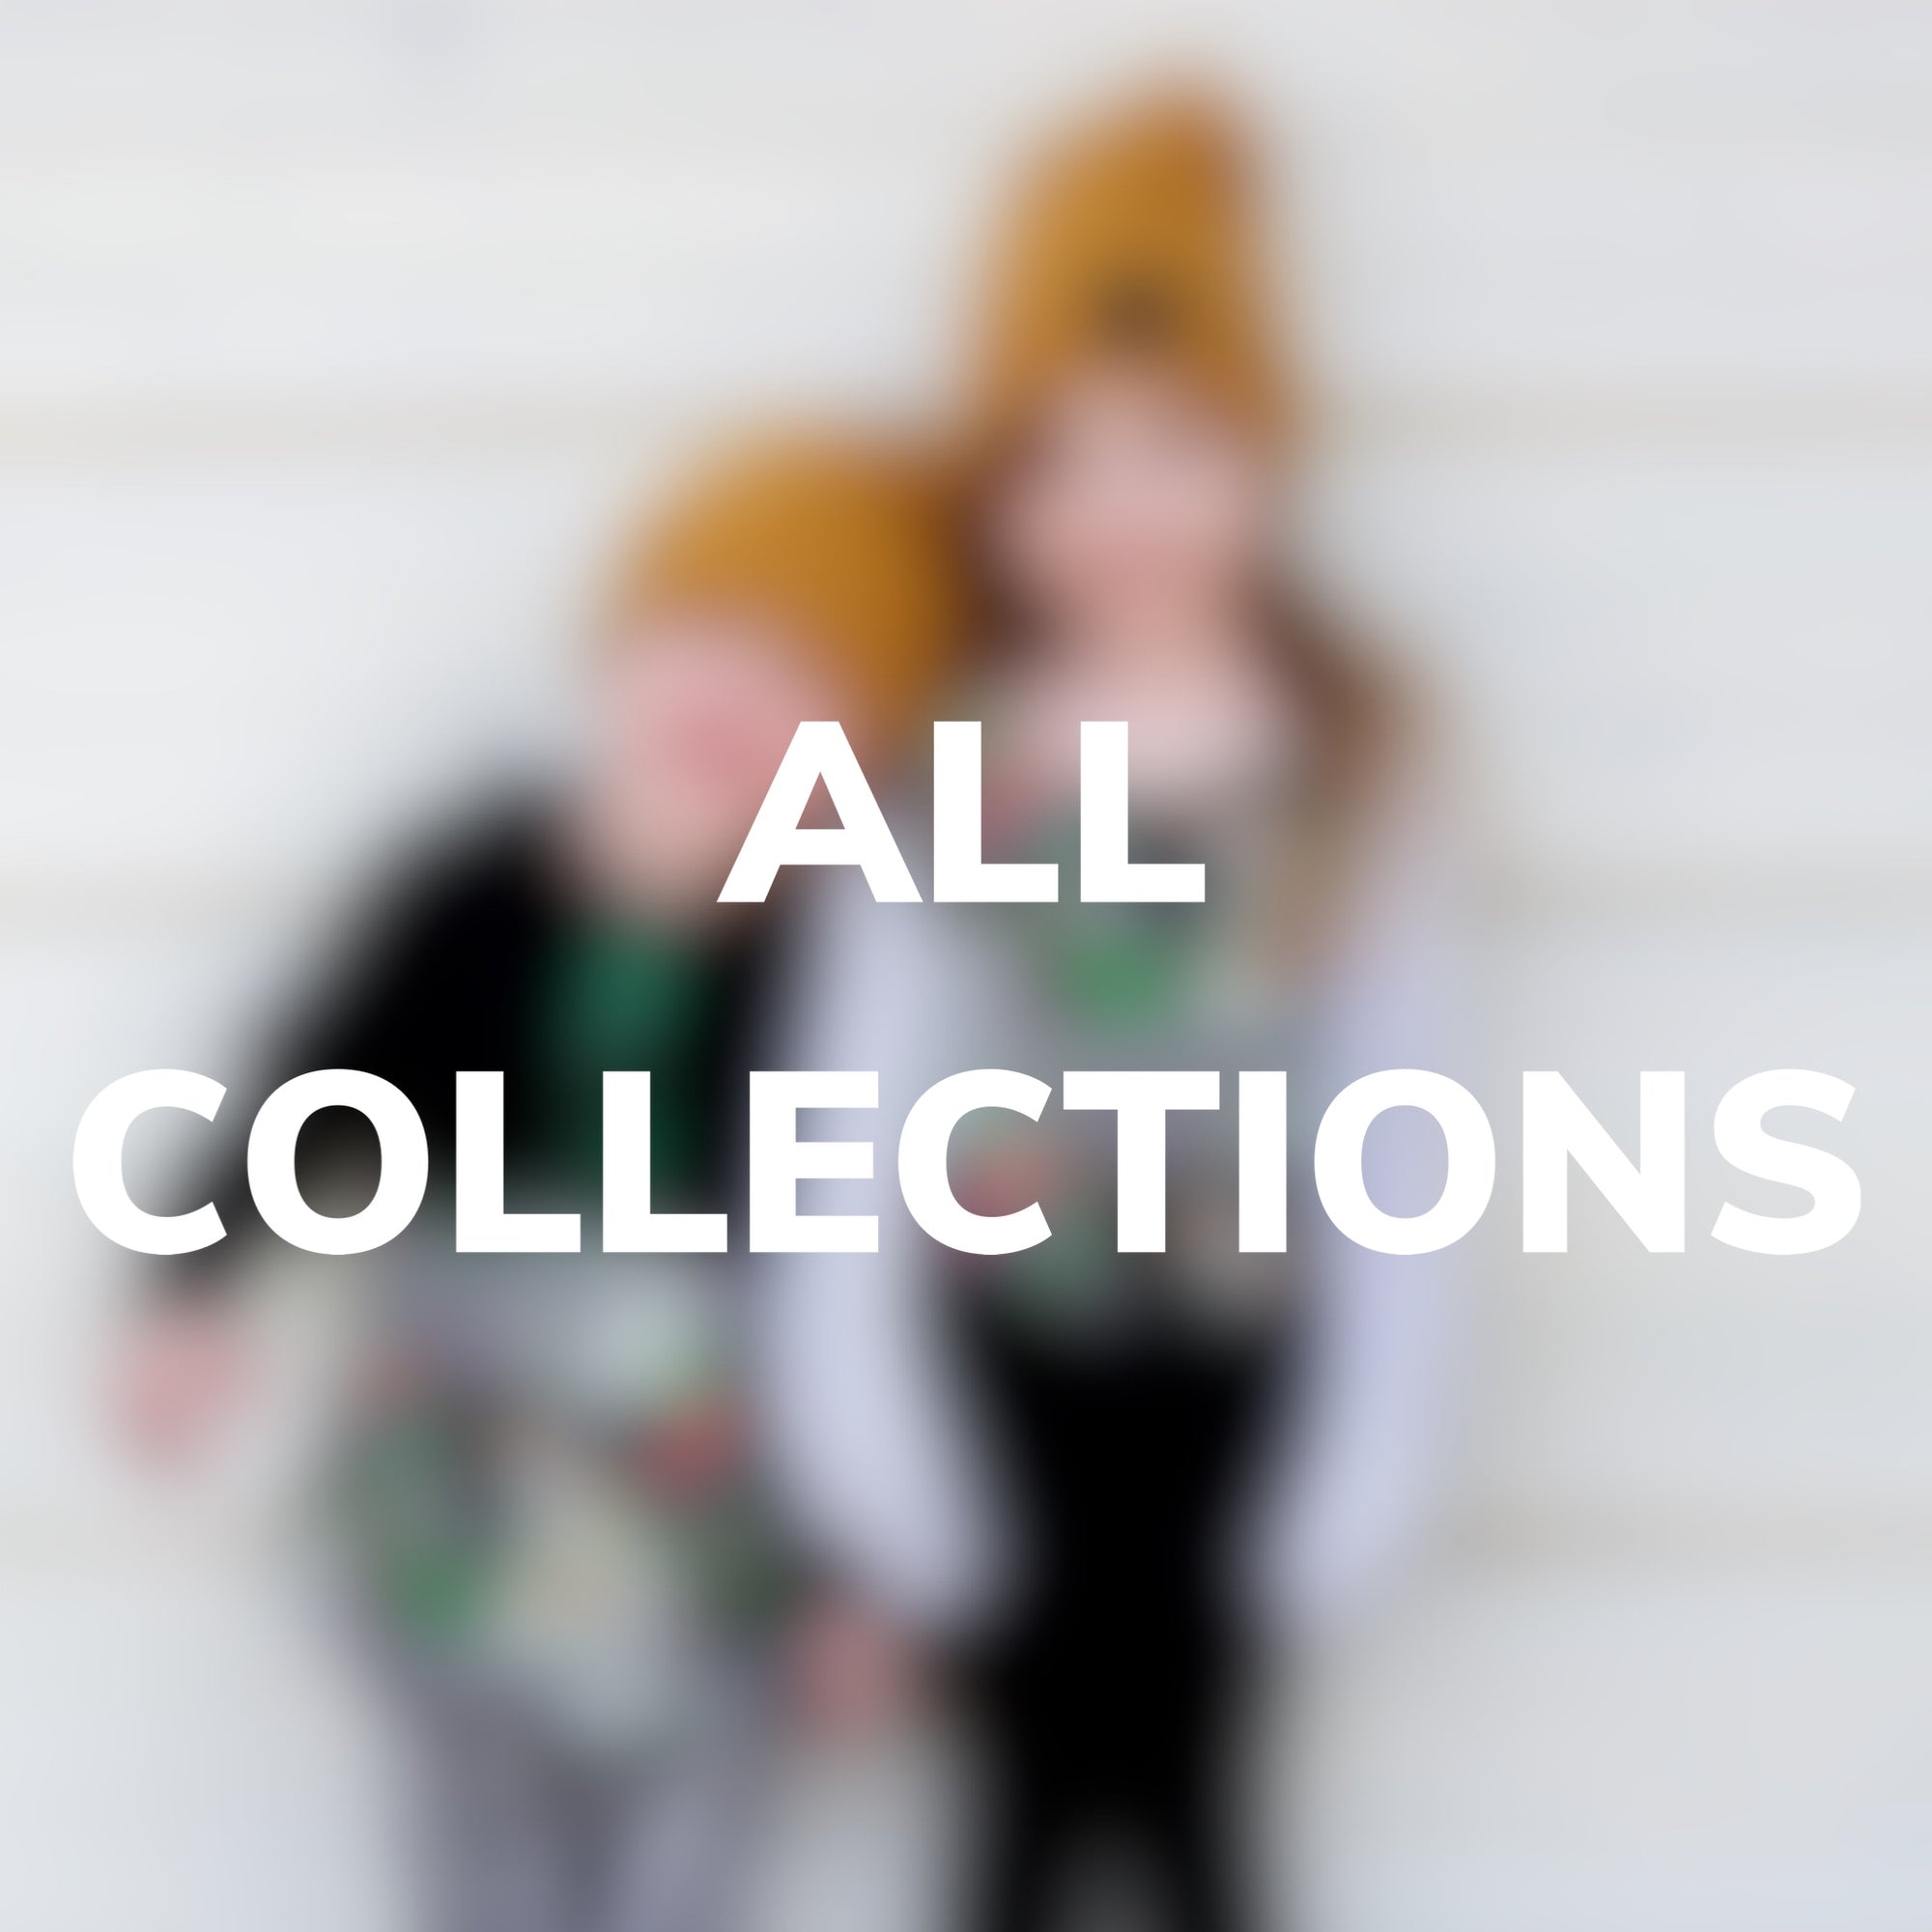 ALL COLLECTIONS